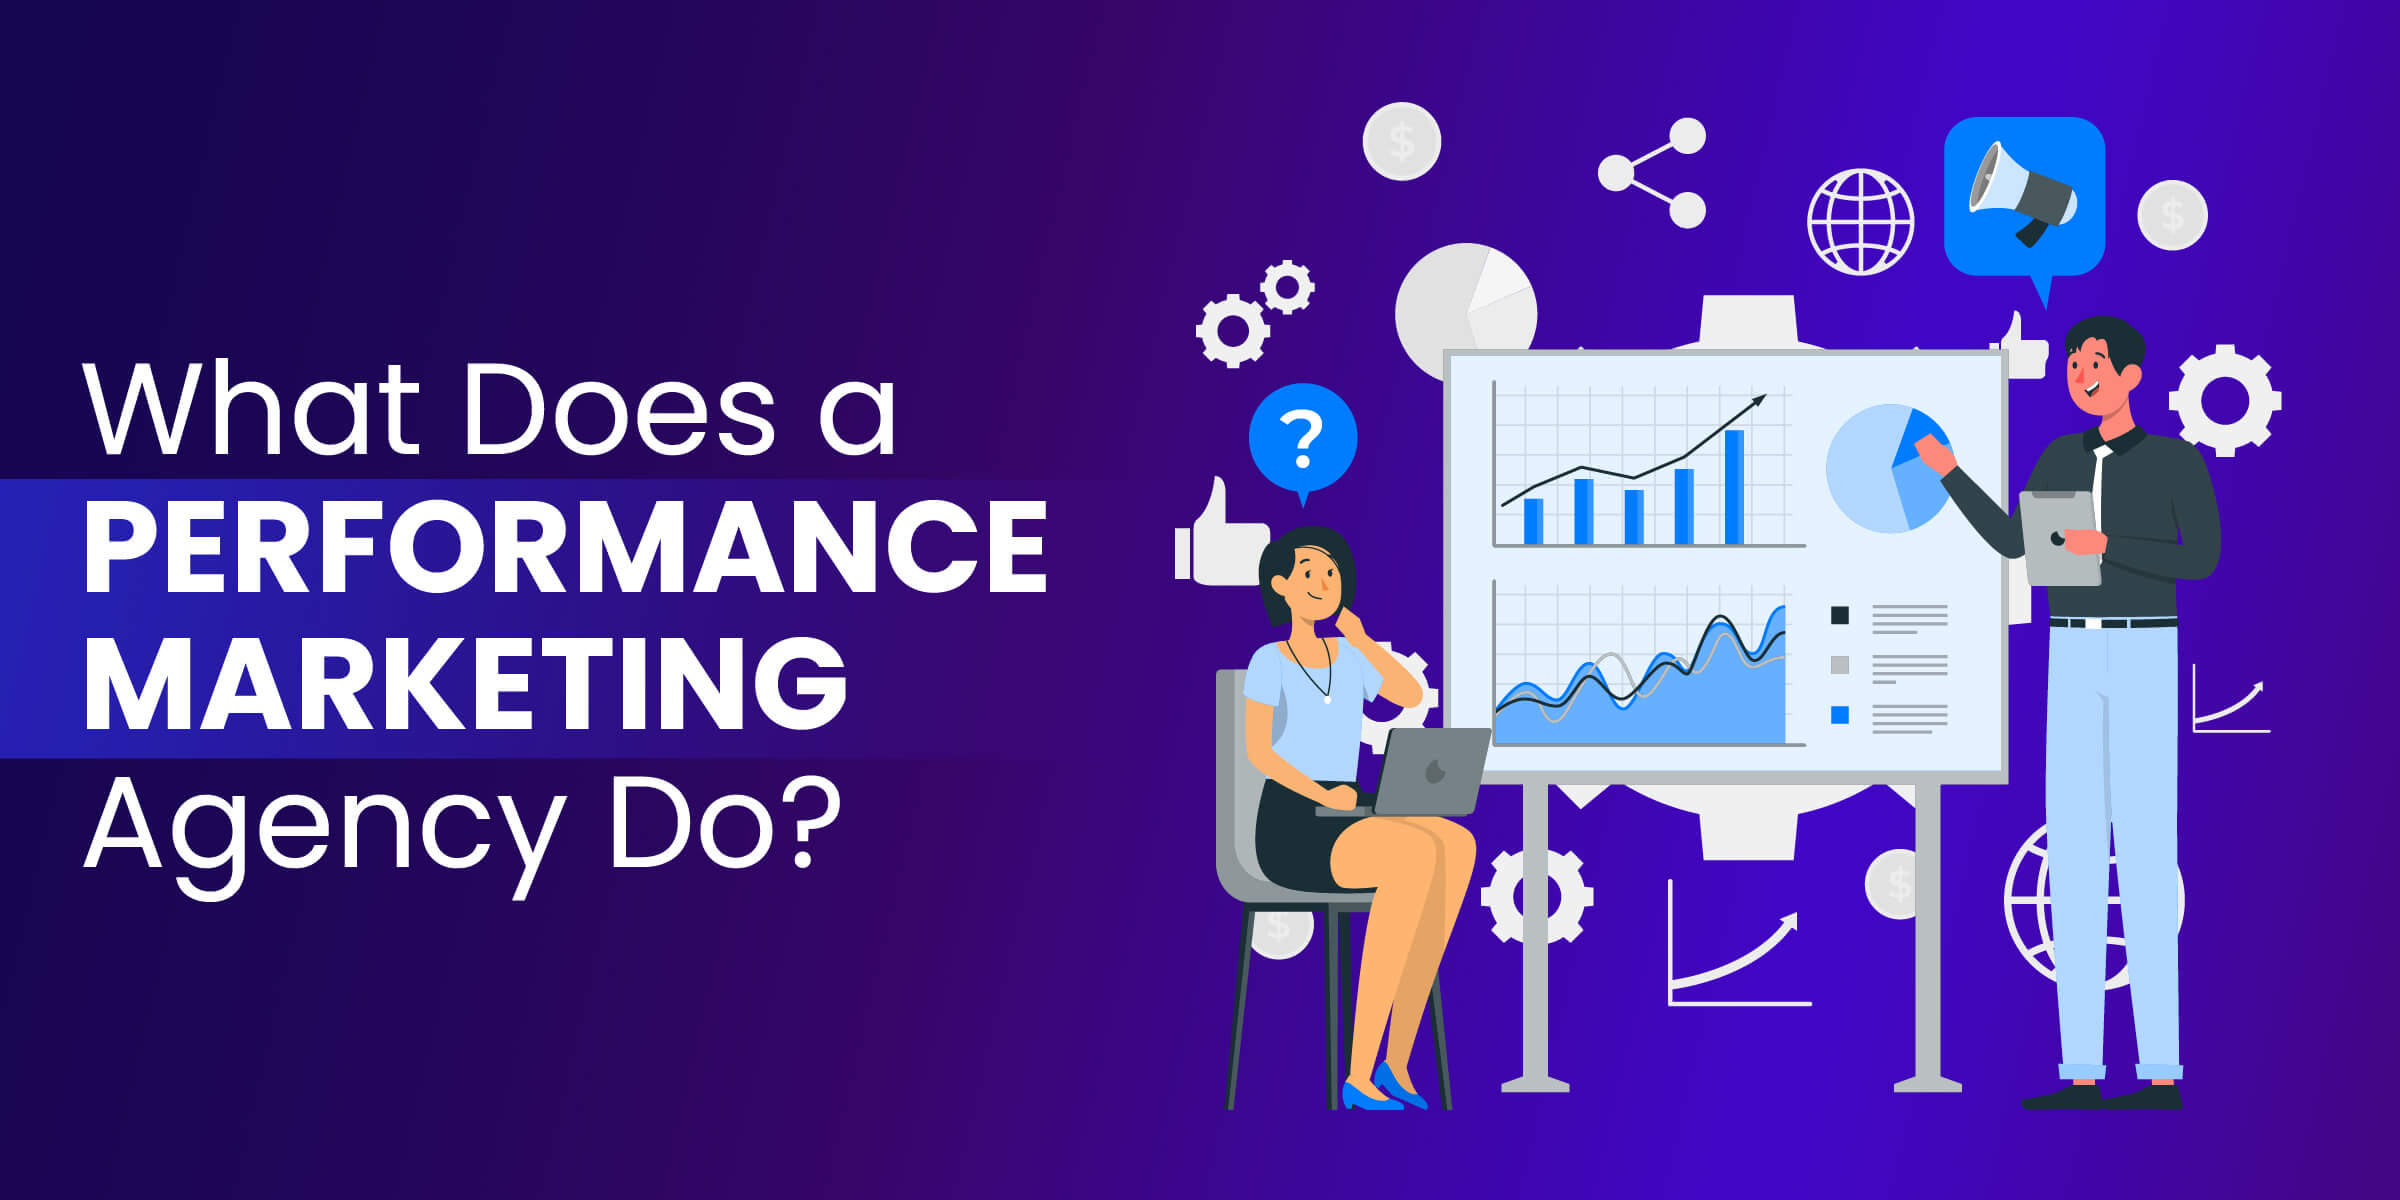 What Does a Performance Marketing Agency Do